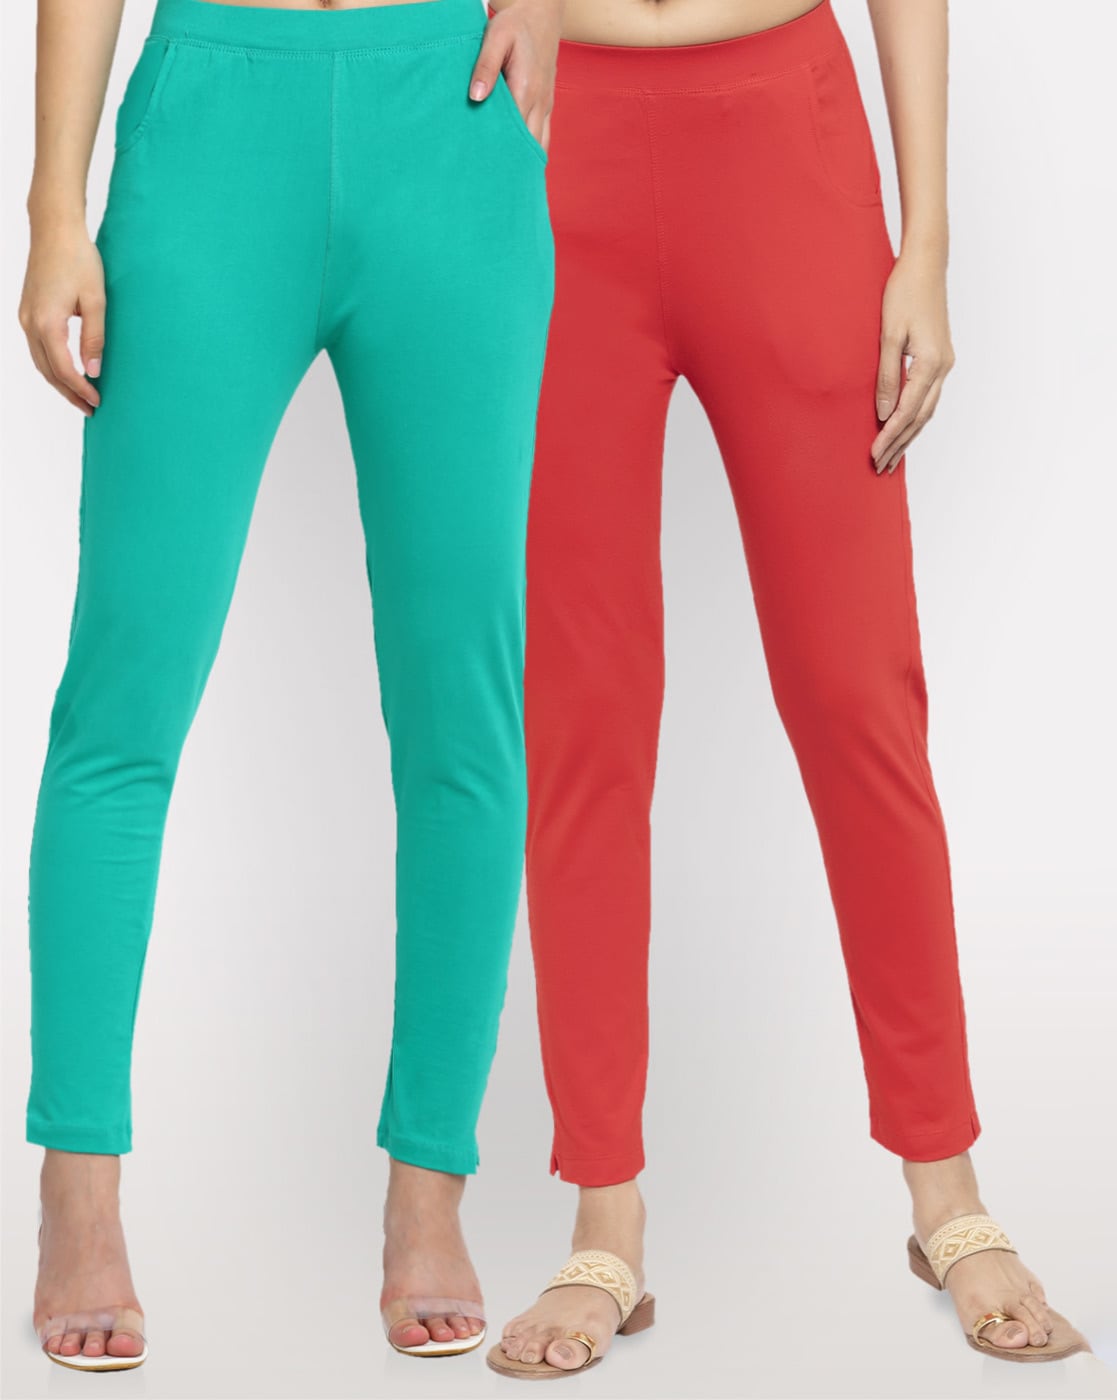 Buy Comfort Lady Cotton Pants  ALN4SWAG  alntashansimplified